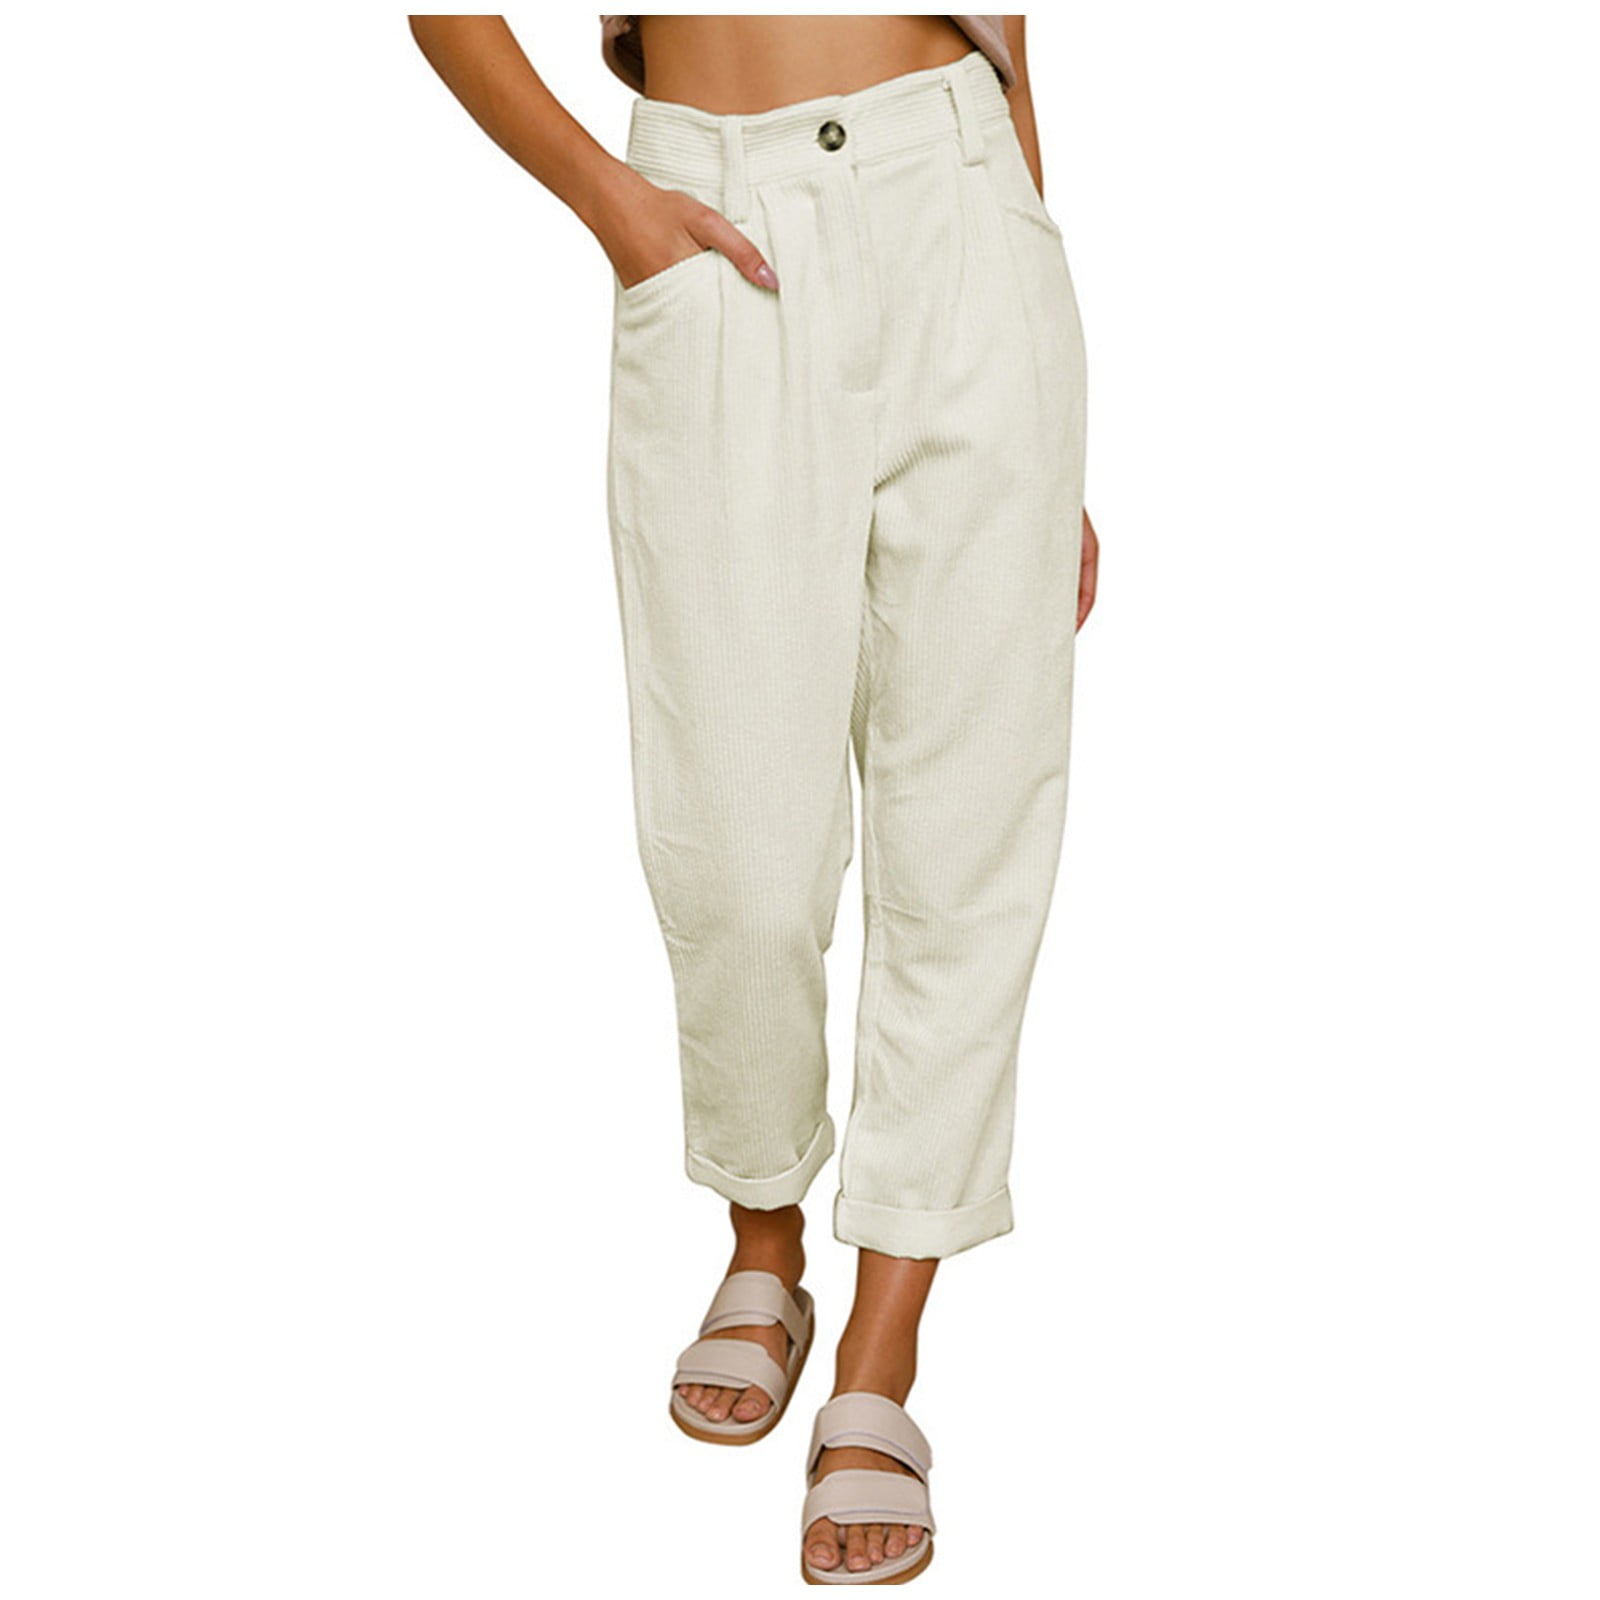 HHei_K Women's High Waist Casual Pants Solid Color Corduroy Loose